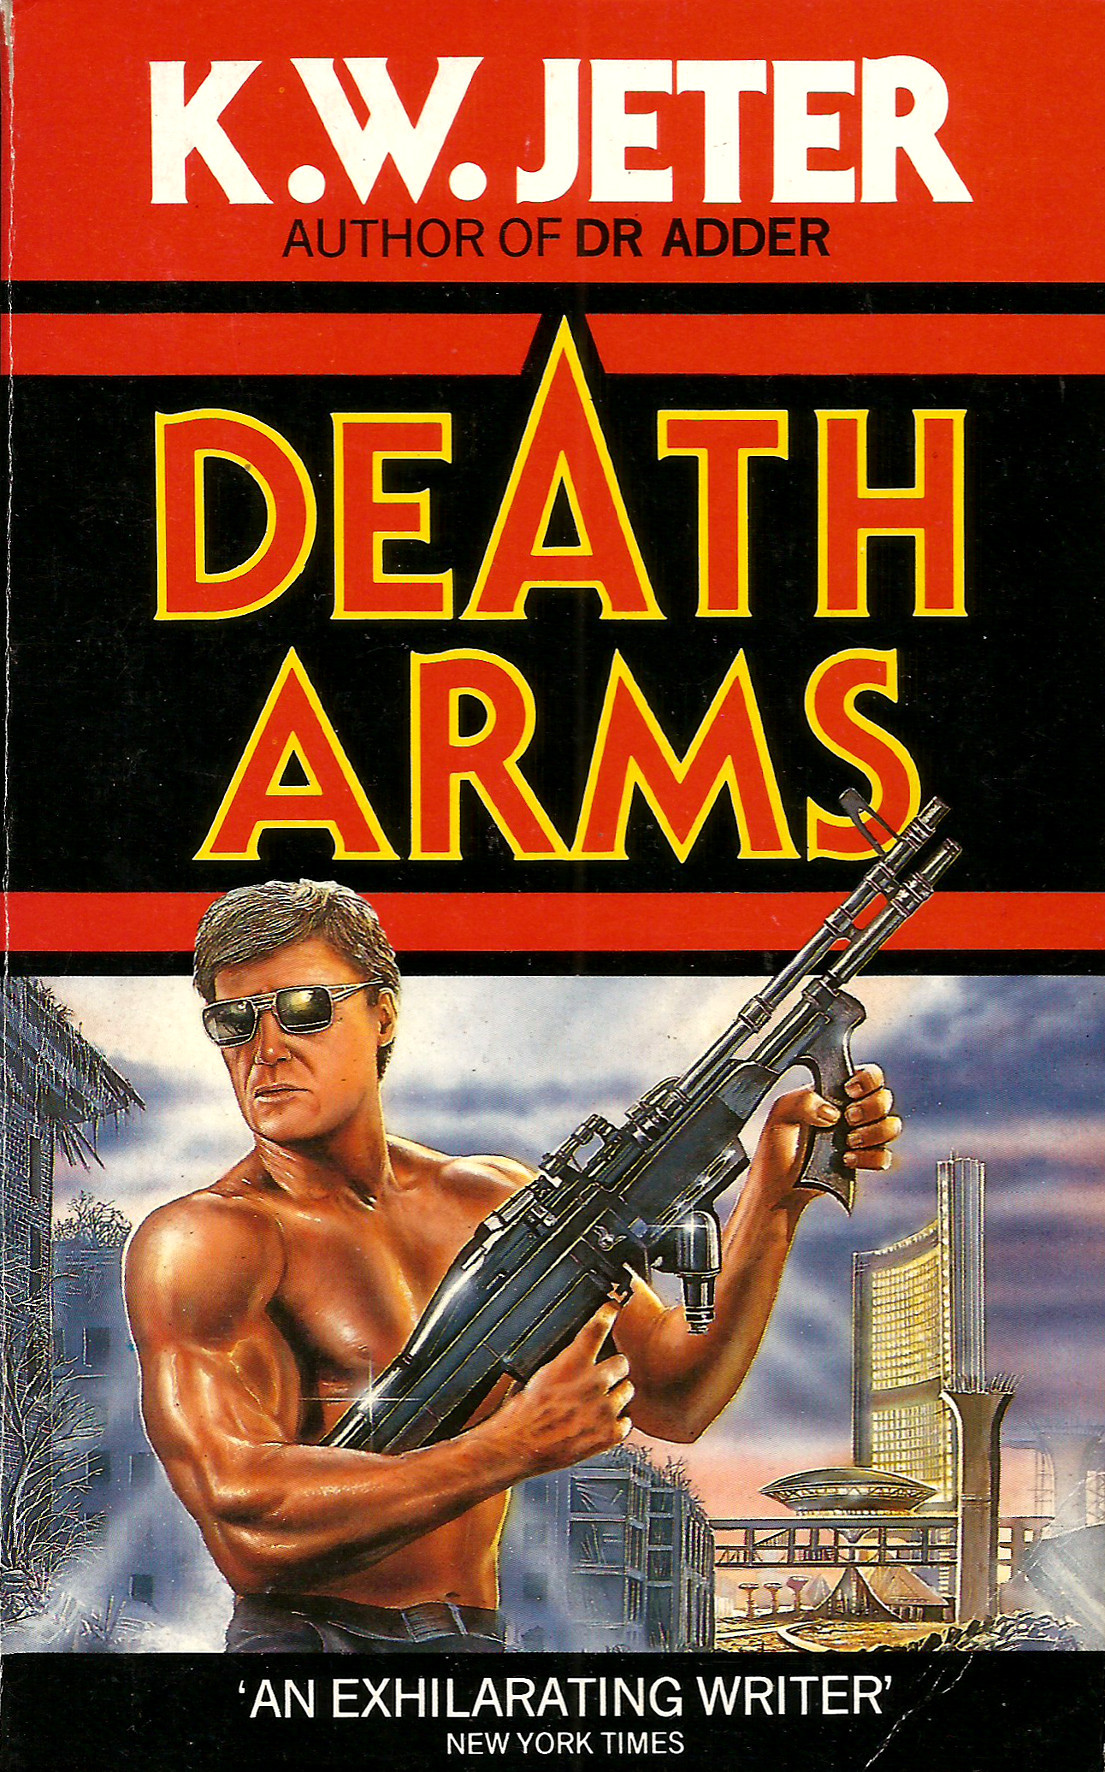 Death Arms, by K.W. Jeter (Grafton, 1987). Front cover illustration by Steve Crisp.